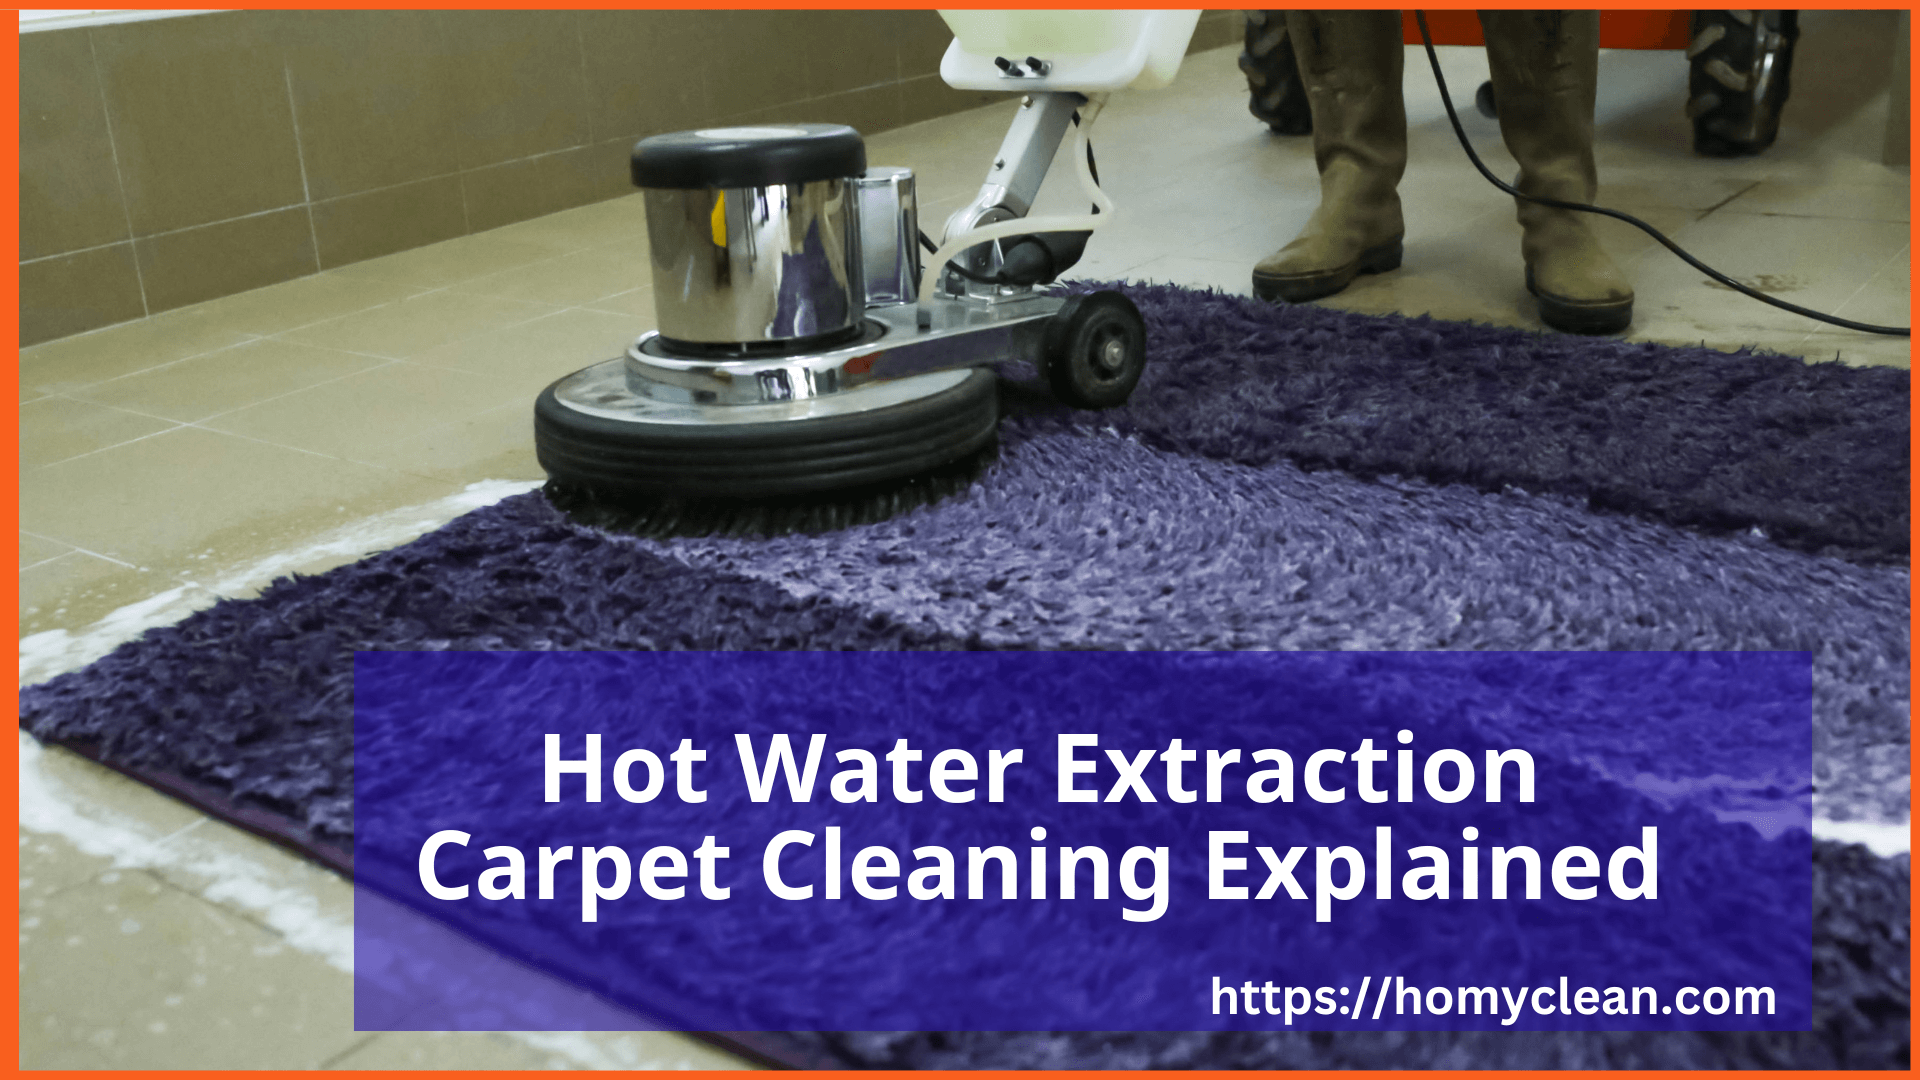 Hot Water Extraction Carpet Cleaning: Everything You Need to Know